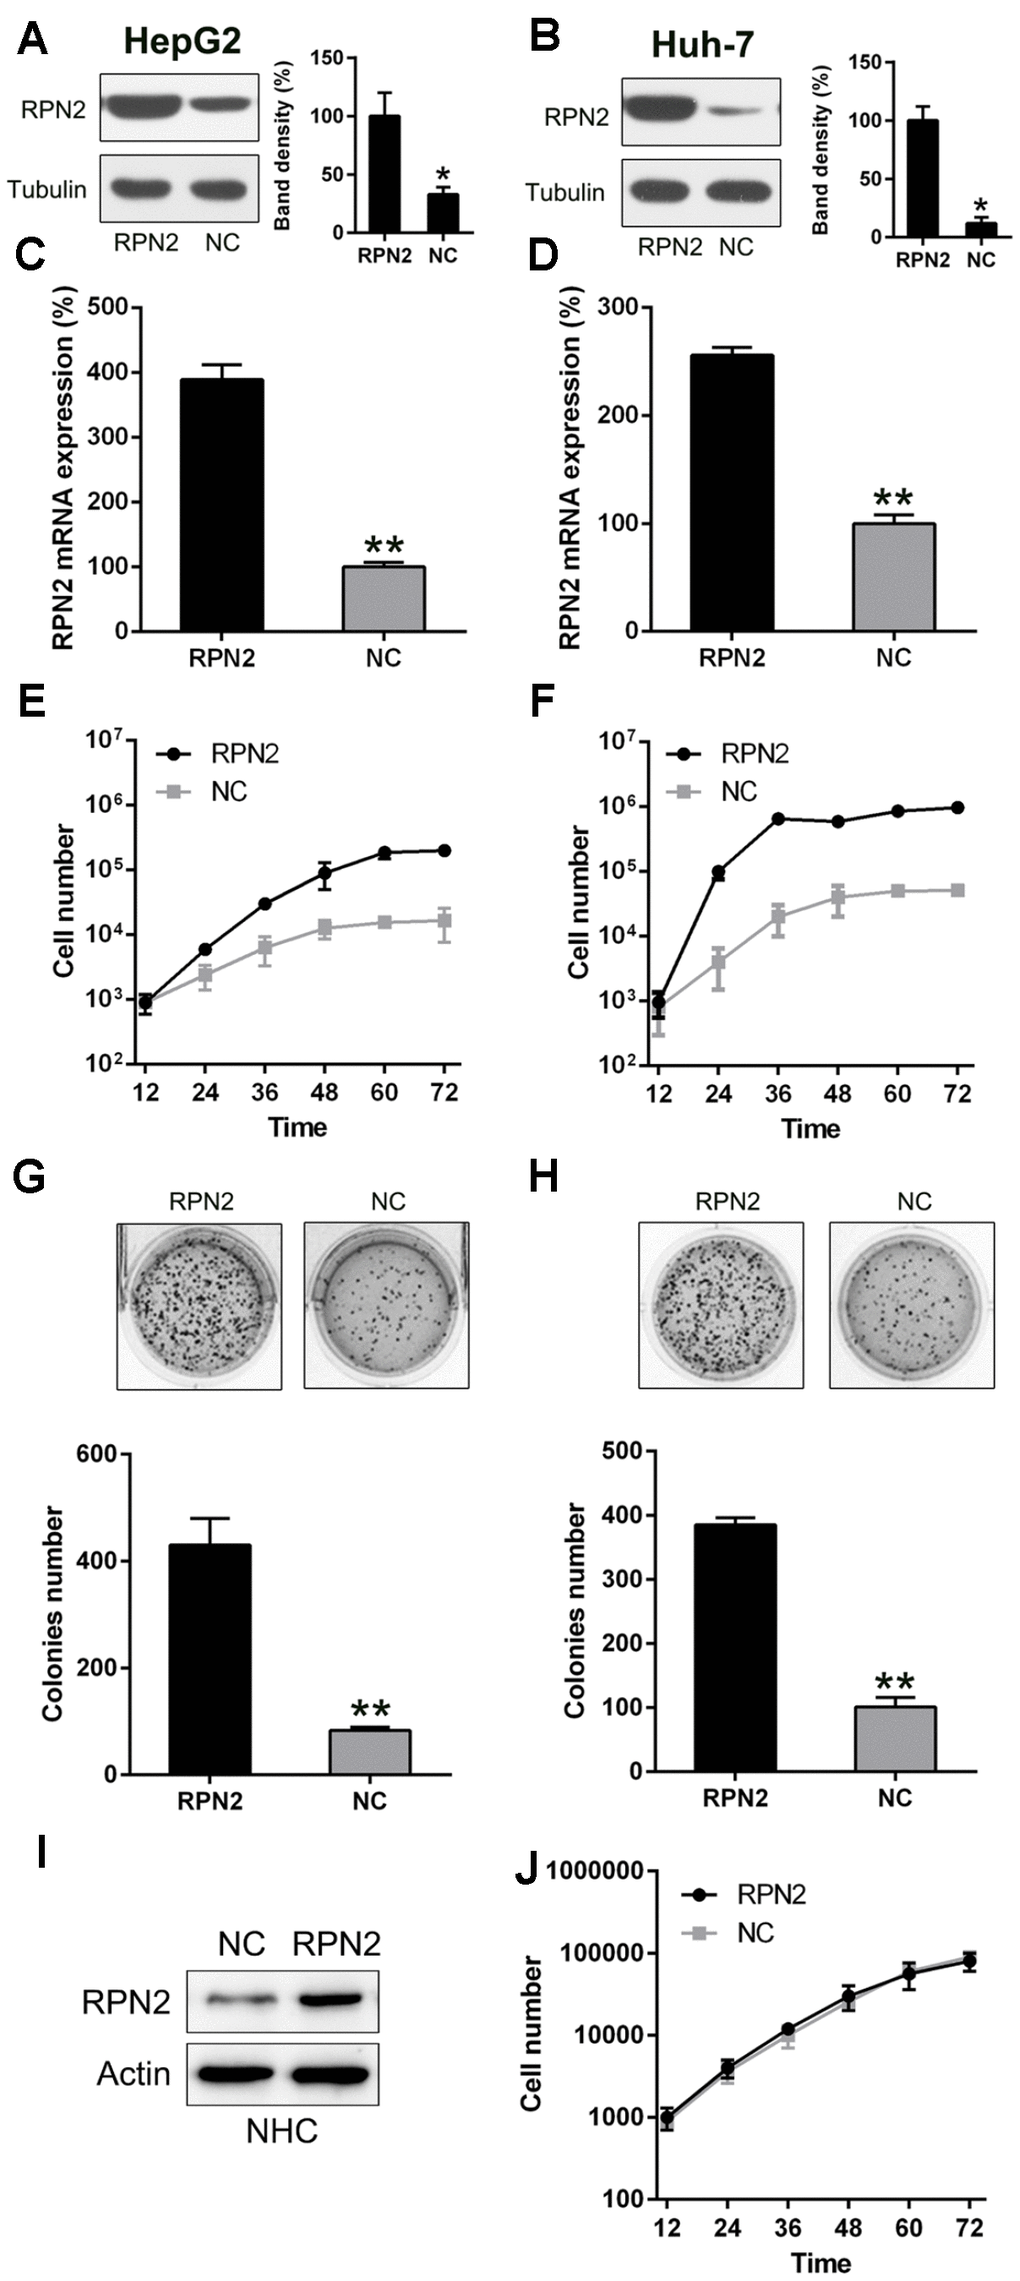 RPN2 overexpression promotes proliferation of Huh-7 and HepG2 cells. The cell lines were transfected with AD-RPN2 and AD-NC (control). Western blotting (A, B) and qPCR (C, D) were conducted to confirm RPN2 overexpression in both the cell lines. (E, F) Multiplication of Huh-7 and HepG2 cells was measured at time points of 12, 24, 36, 48, 60, and 72 h after transfection by the MTT assay. (G, H) Soft agar colony formation assay of the Huh-7 and HepG2 cells expressing RPN2 and controls. (I) The NHC were transfected with AD-RPN2 and AD-NC (control). WB was conducted to confirm RPN2 overexpression in NHC. (J) Multiplication of NHC was measured at time points of 12, 24, 36, 48, 60, and 72 h after transfection by the MTT assay. The band of target protein was normalized to the density of action. The quantification was performed independently in a single band. The experiments were performed three times. Data are recorded as mean ± SD. **P 